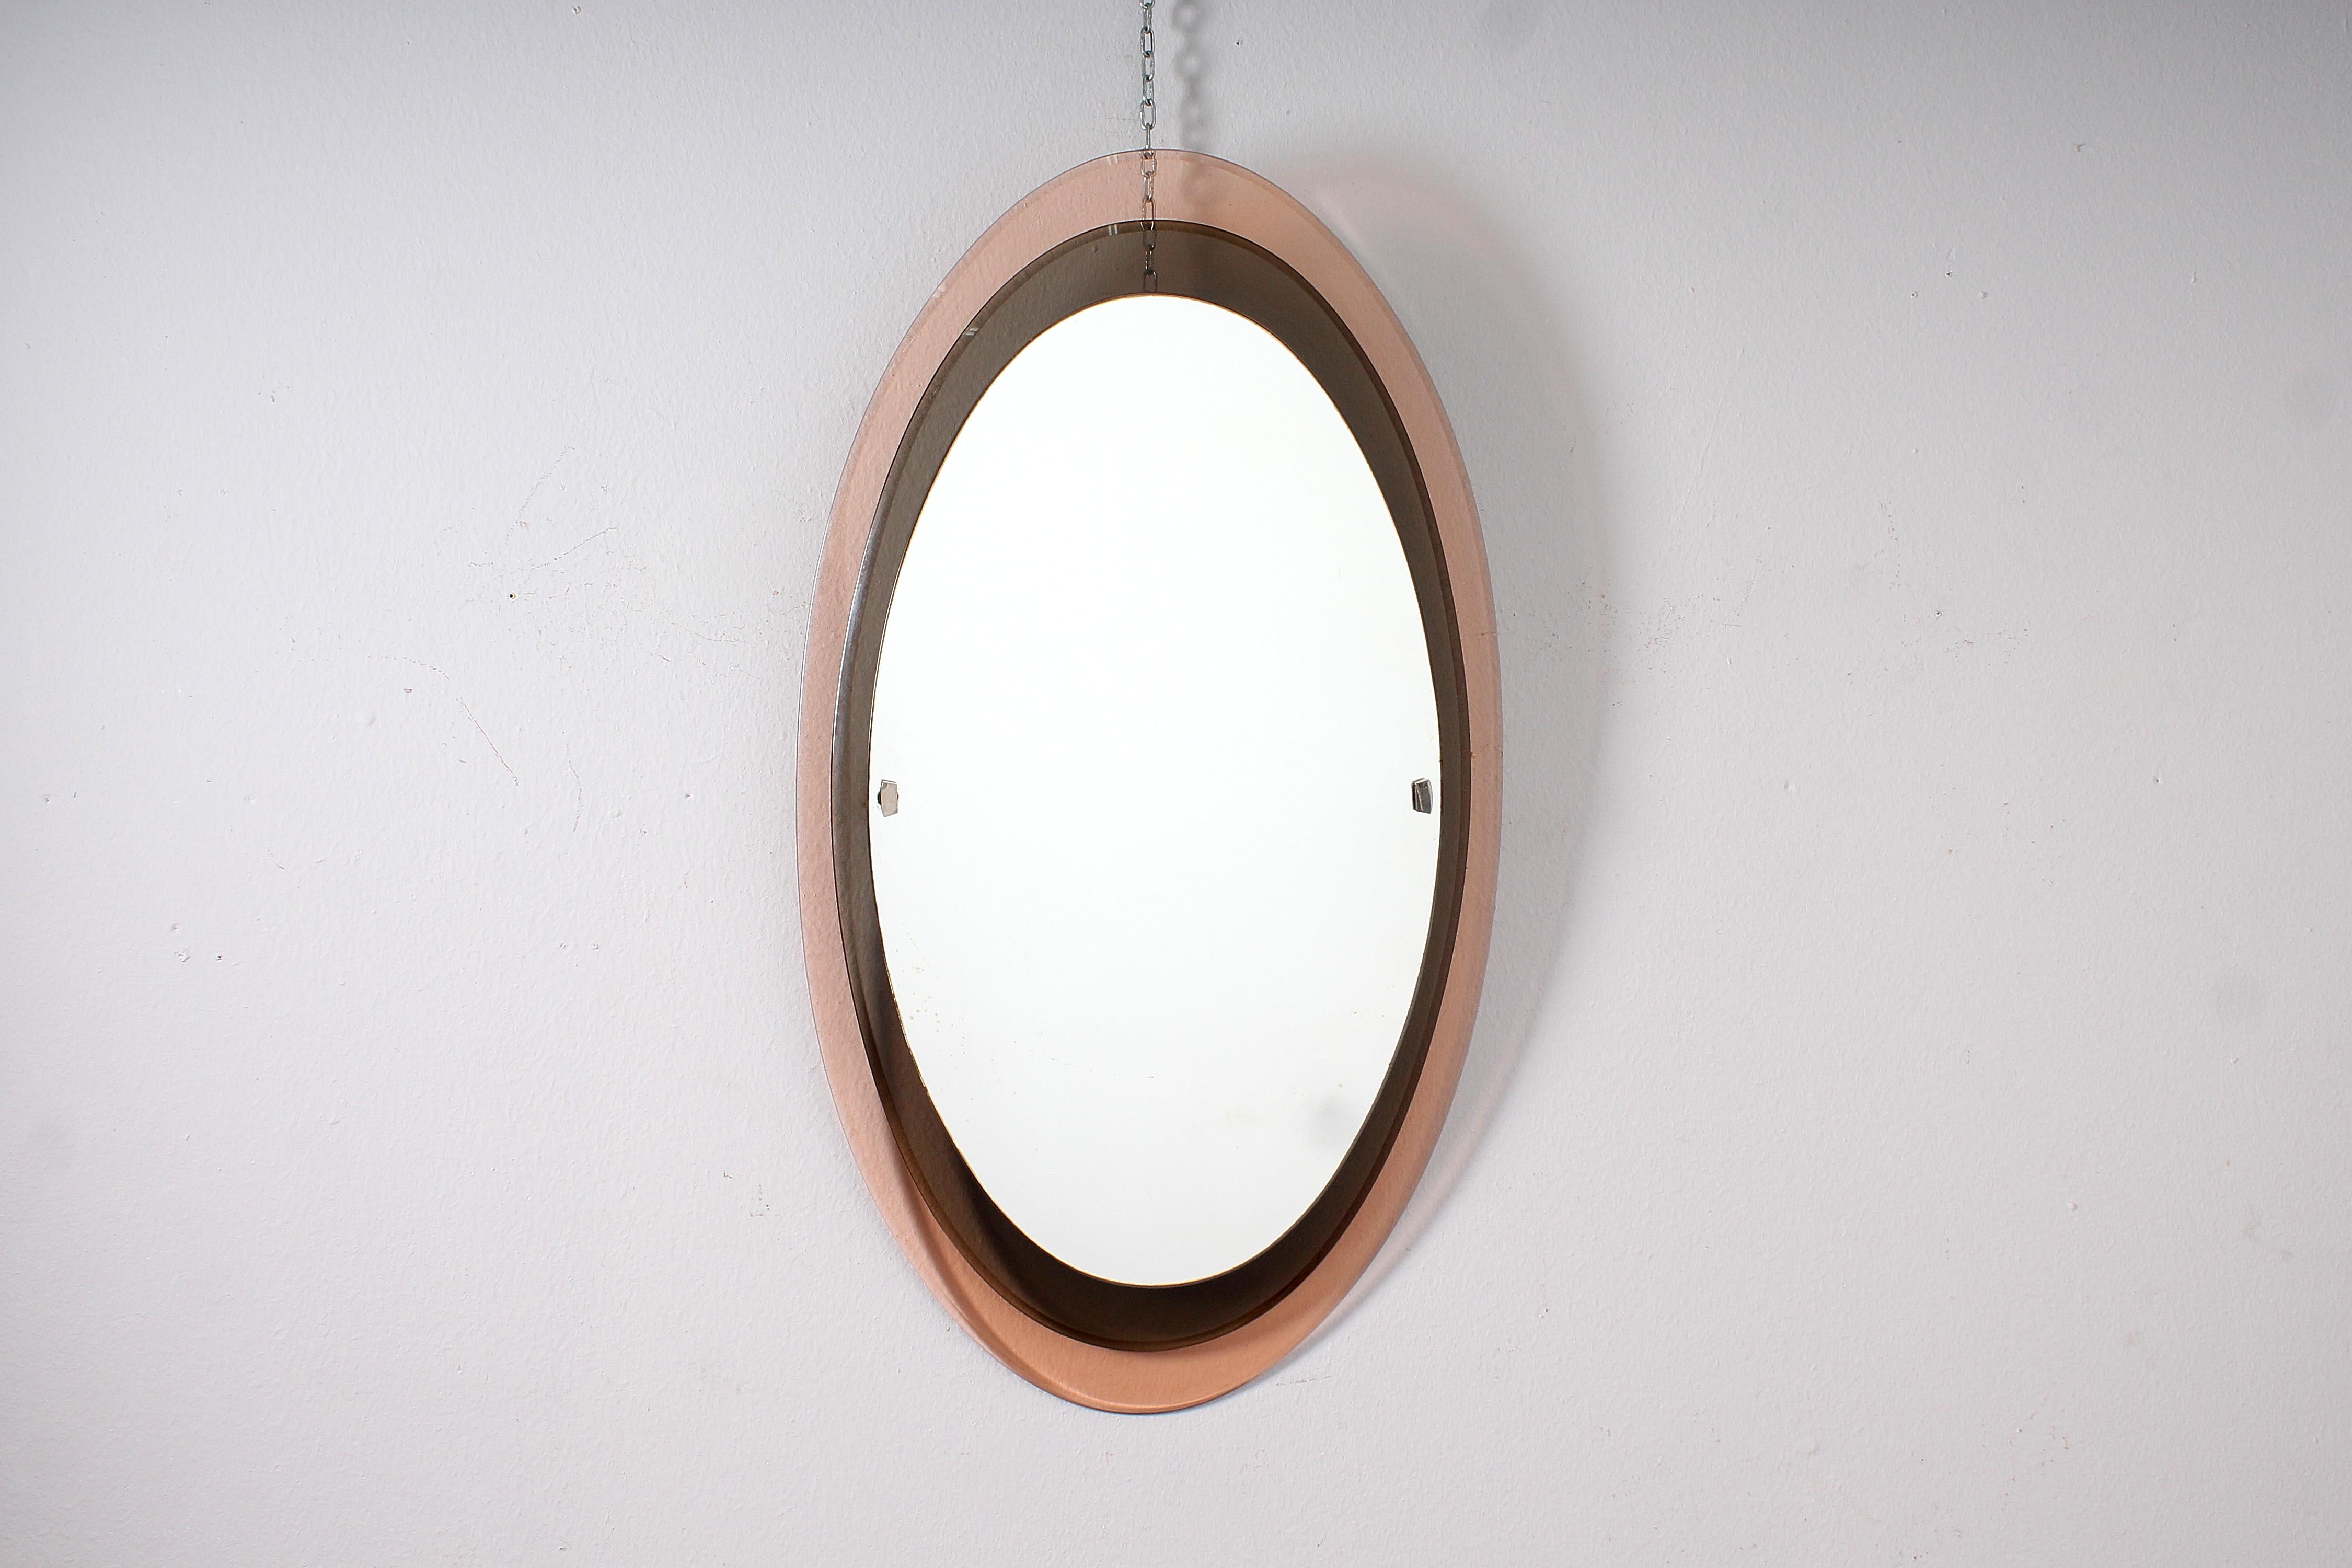 Refined mirror with oval frame on two levels in pink and smoked colored glass, with bevelled edge and mirror also oval. Mod. 